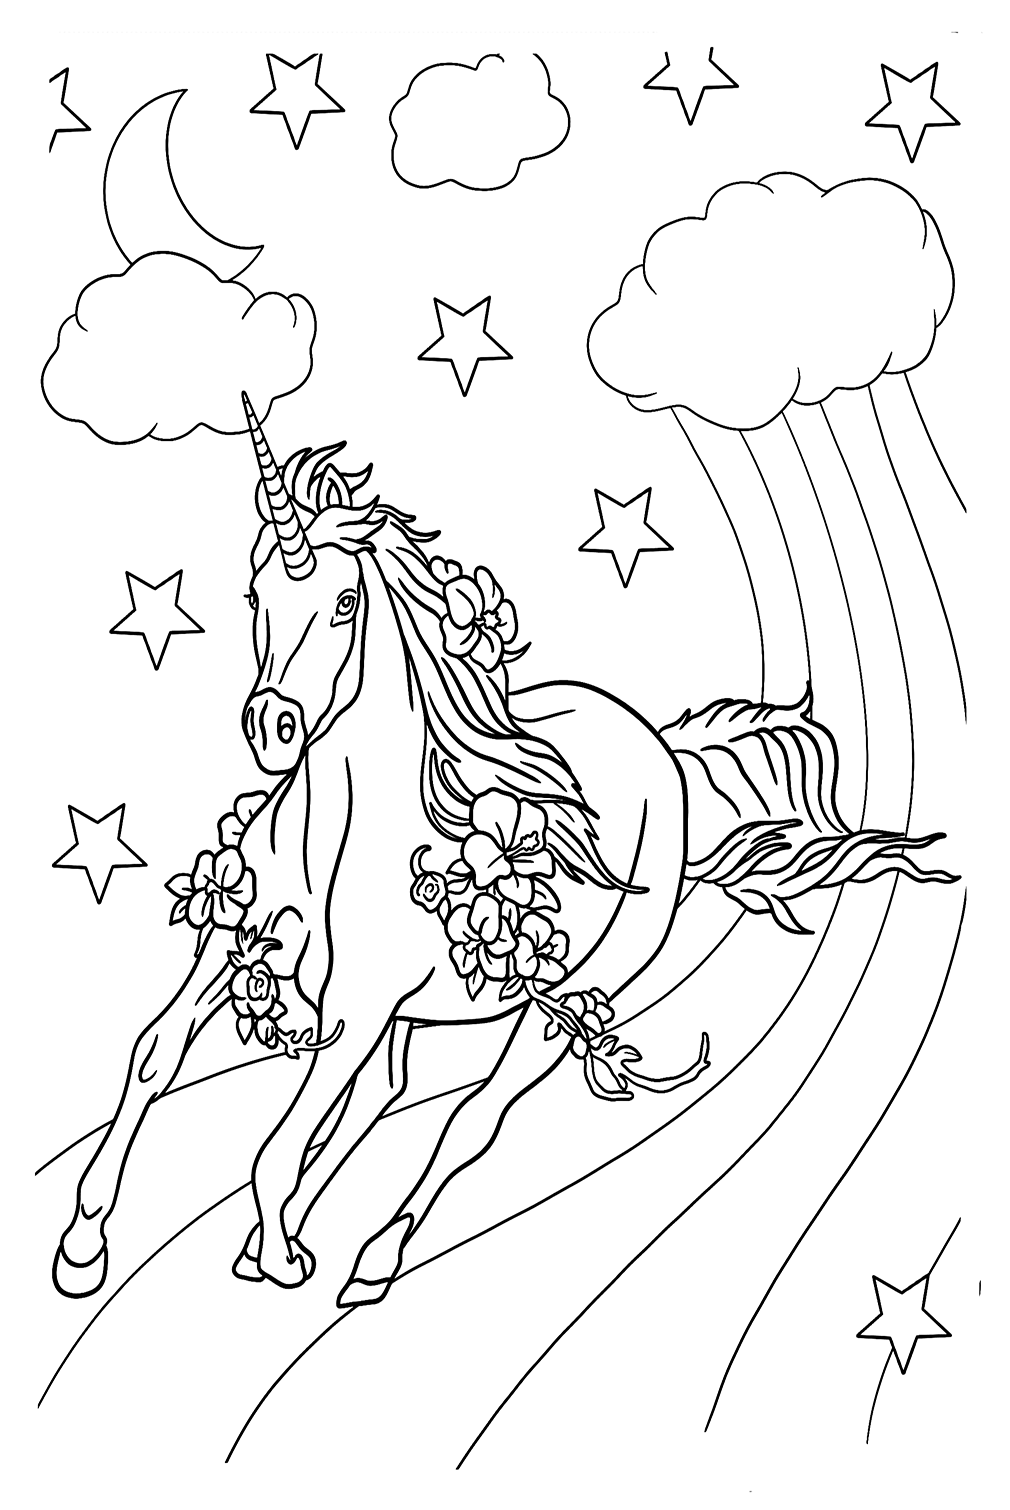 Alicorn Coloring Page from Unicorn